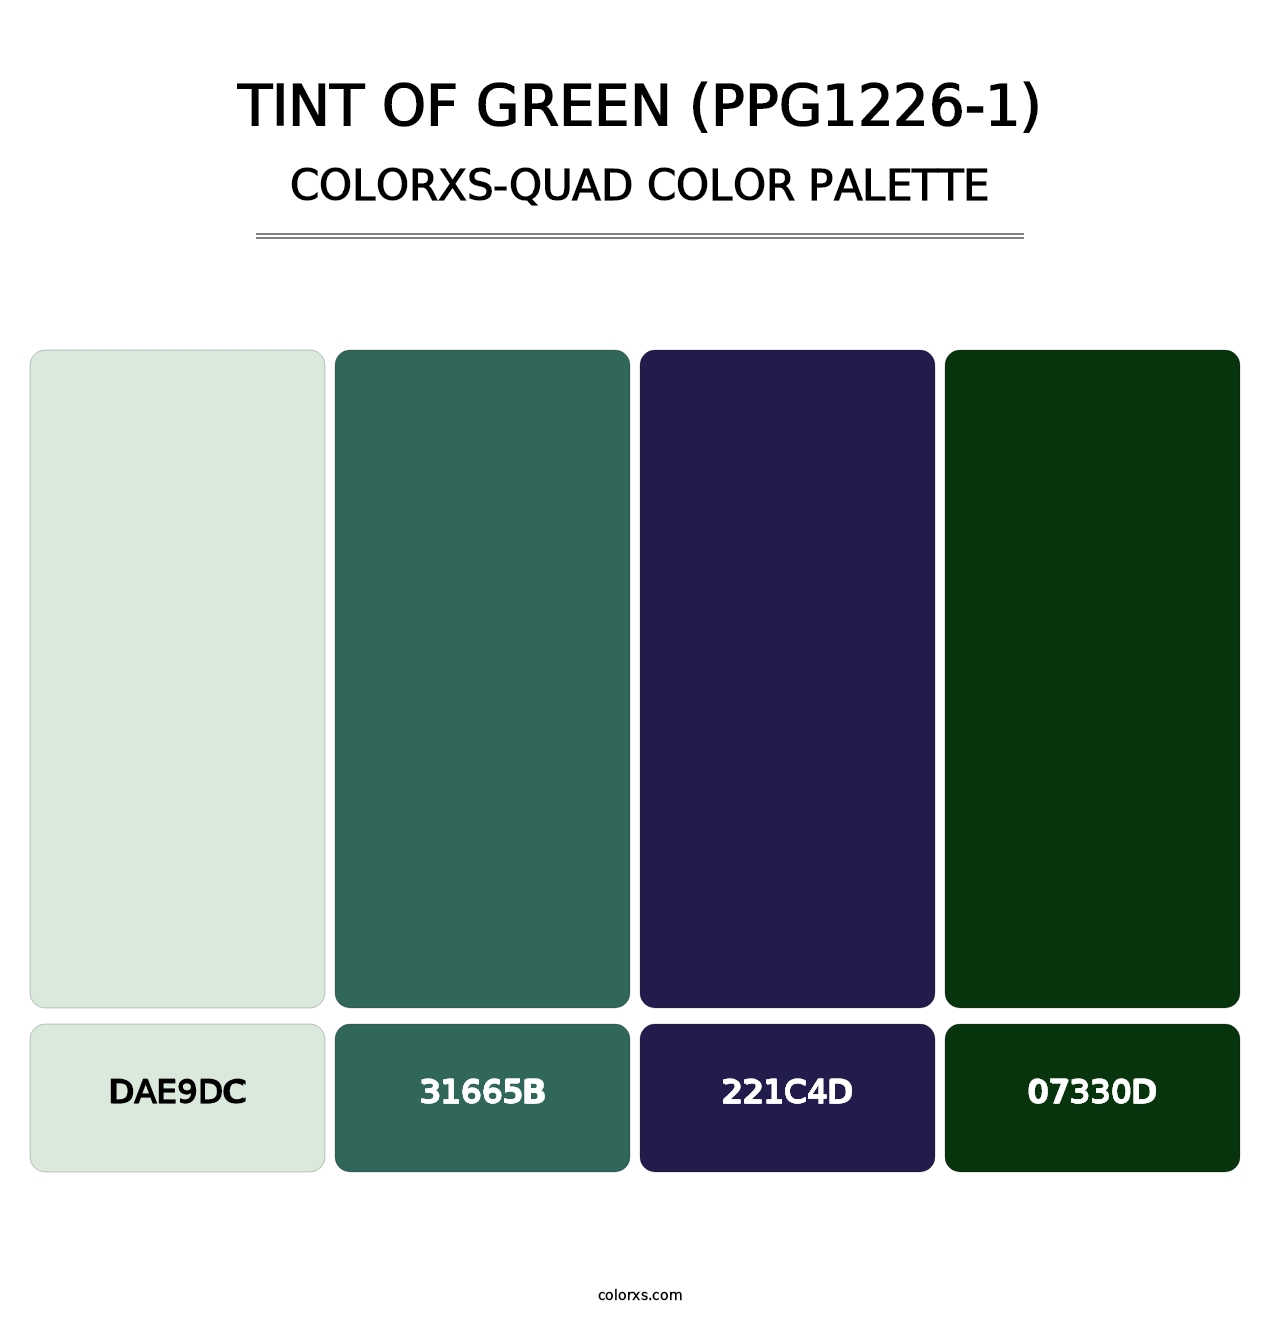 Tint Of Green (PPG1226-1) - Colorxs Quad Palette